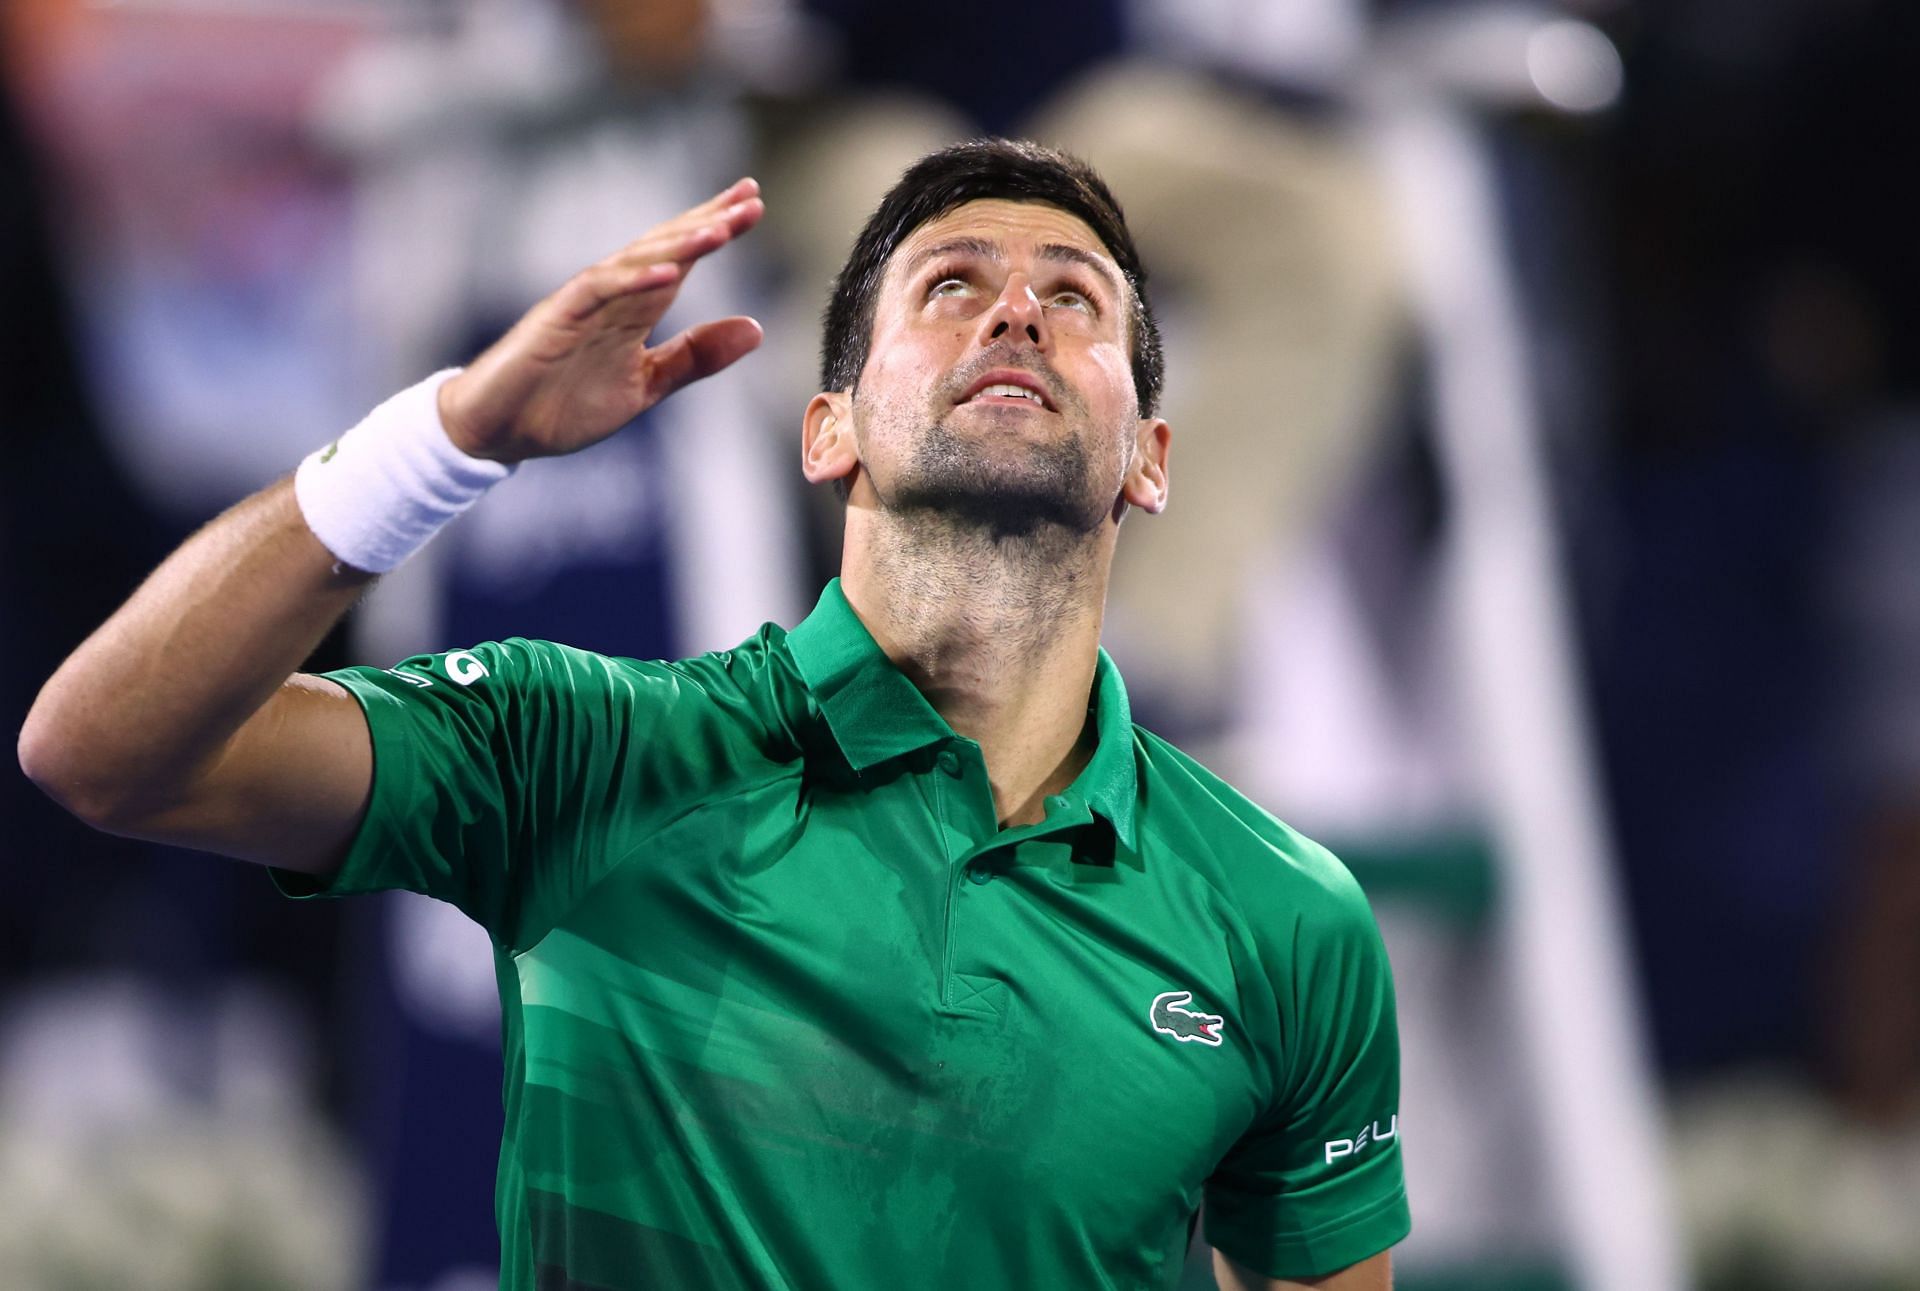 Novak Djokovic was clear that made use of no special provisions for entering Australia